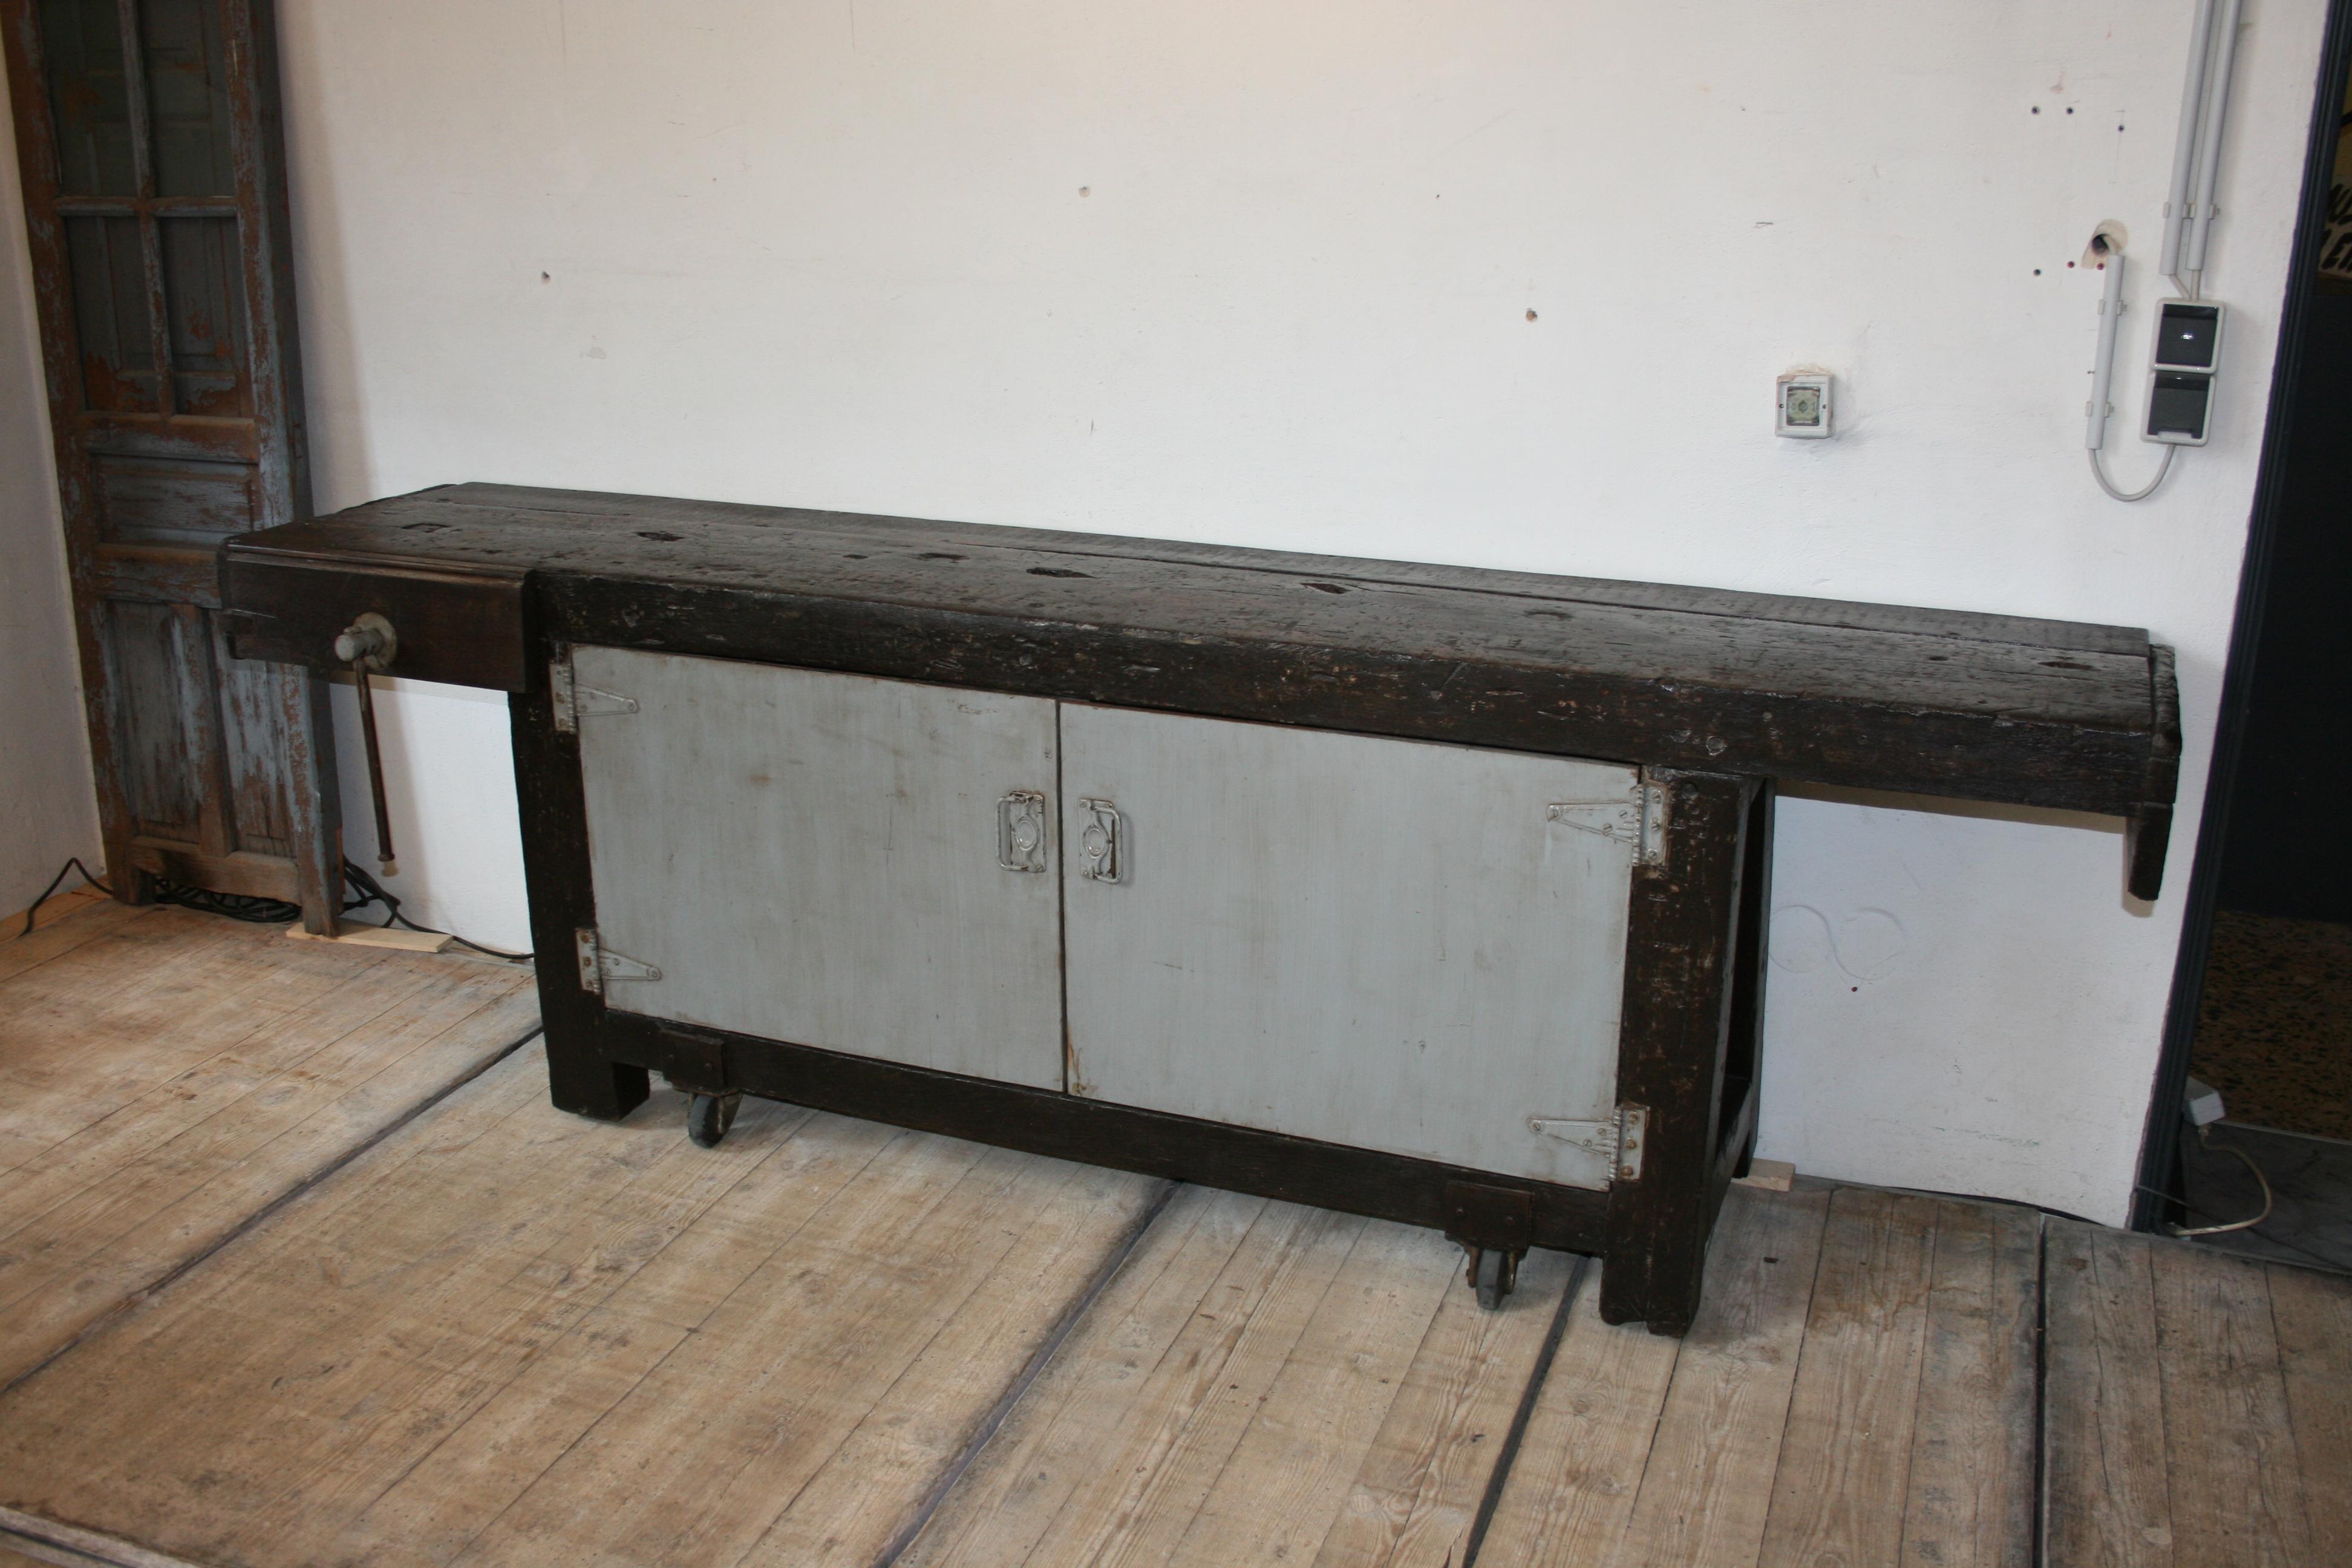 Massive old industrial oak workbench from an old factory in Belgium.
This special workbench is movable on four original old industrial rollers and has below two doors, which have been retrofitted over the decades, behind which are shelves.
ready